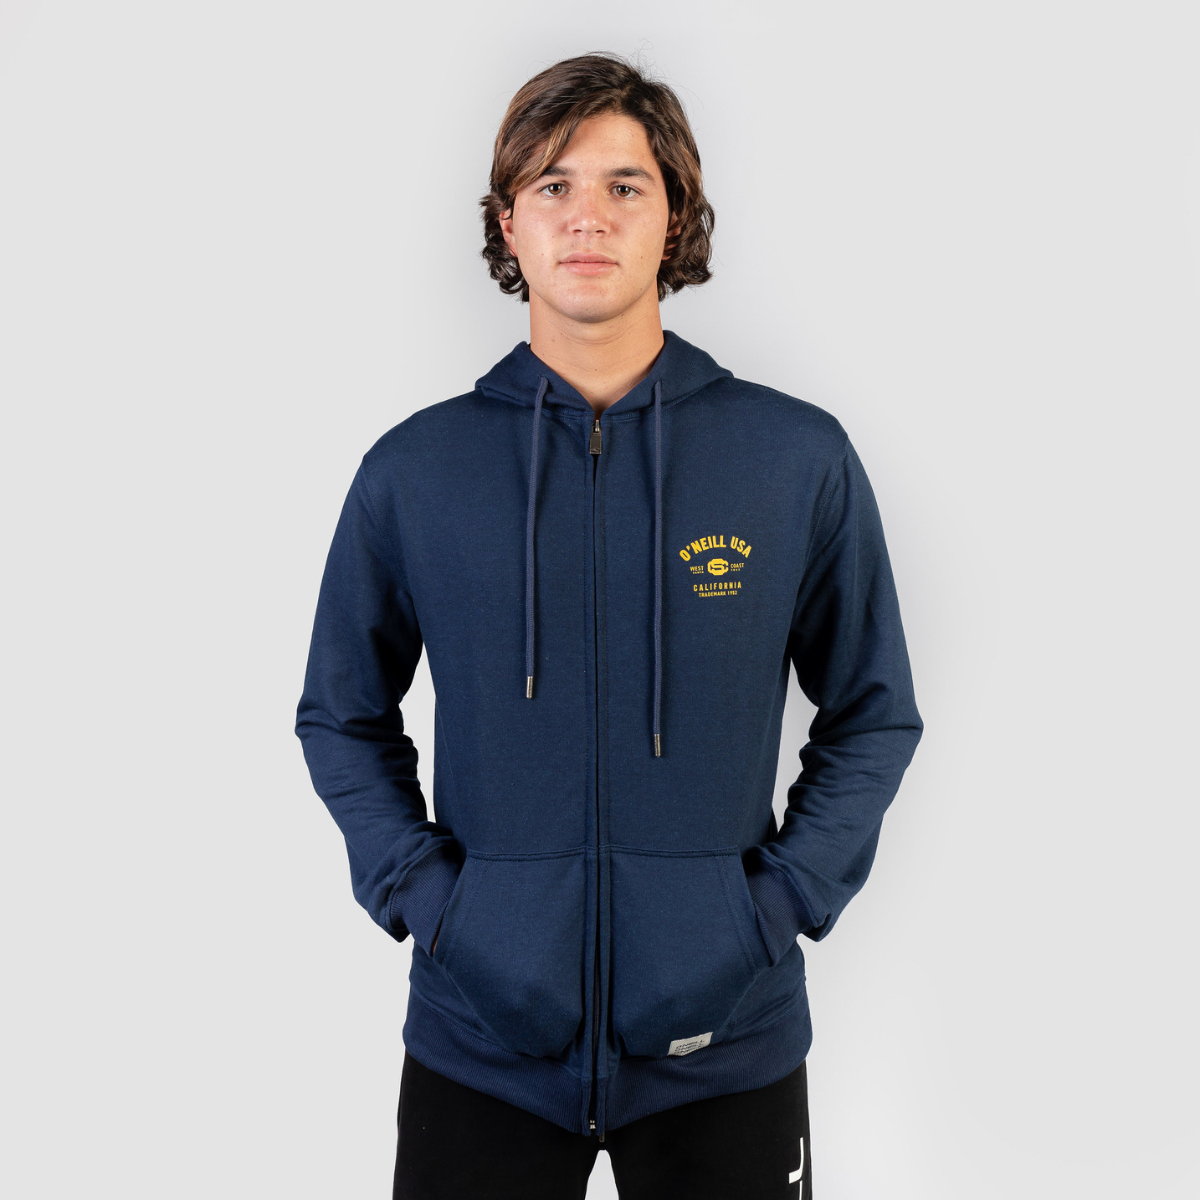 POLERON HOMBRE - STATE FZ HOODIE  - INK BLUE - IN87